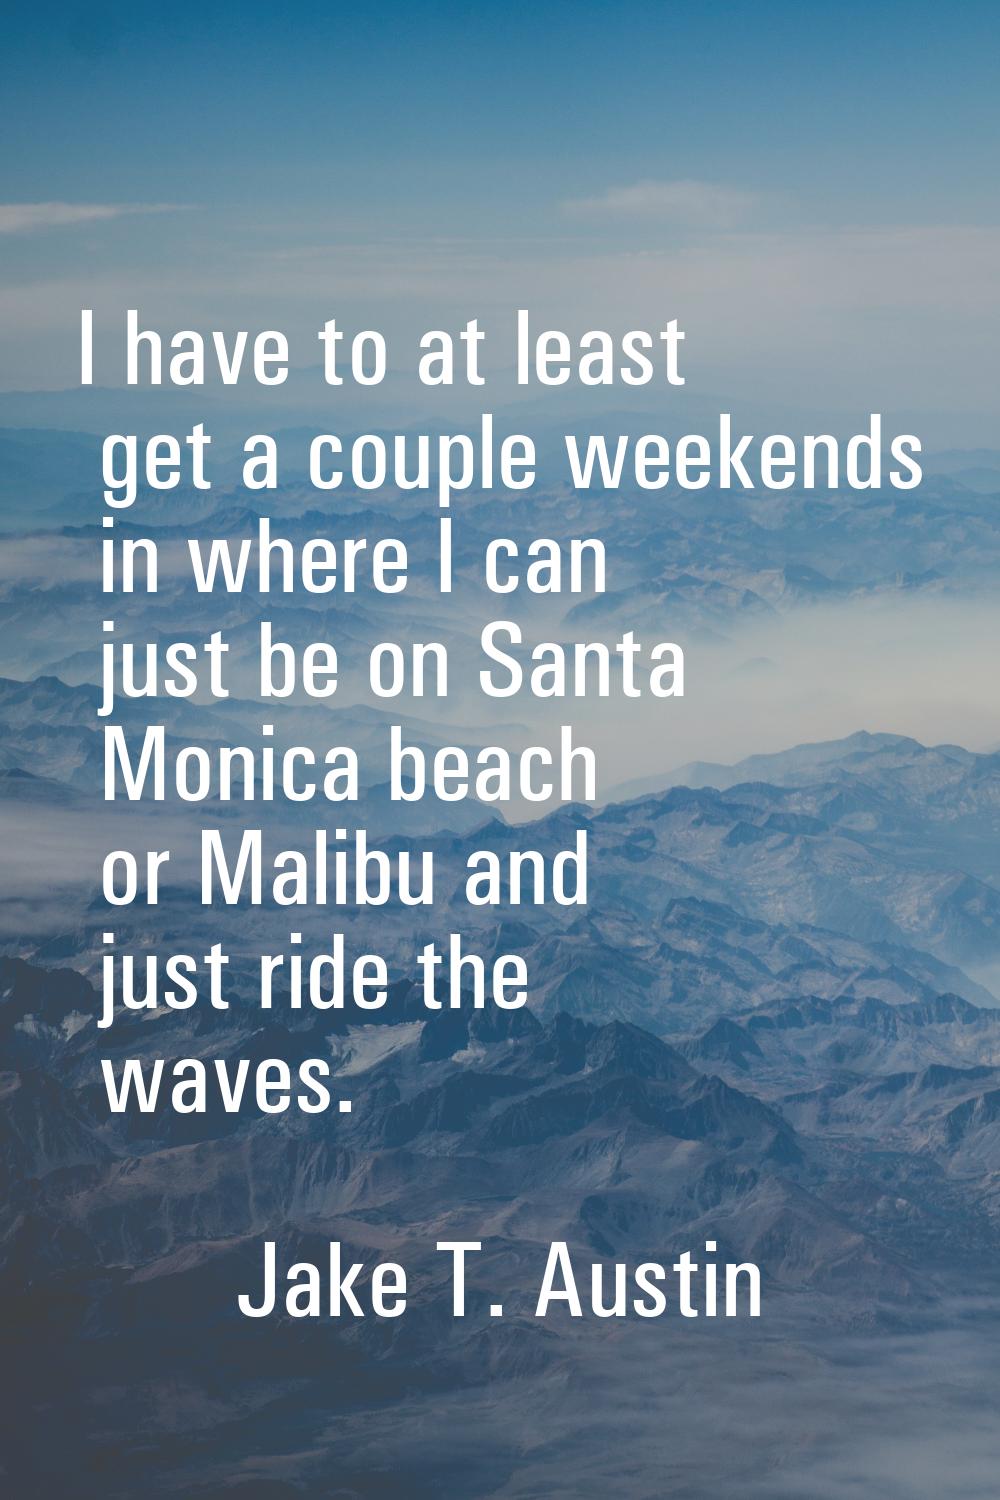 I have to at least get a couple weekends in where I can just be on Santa Monica beach or Malibu and